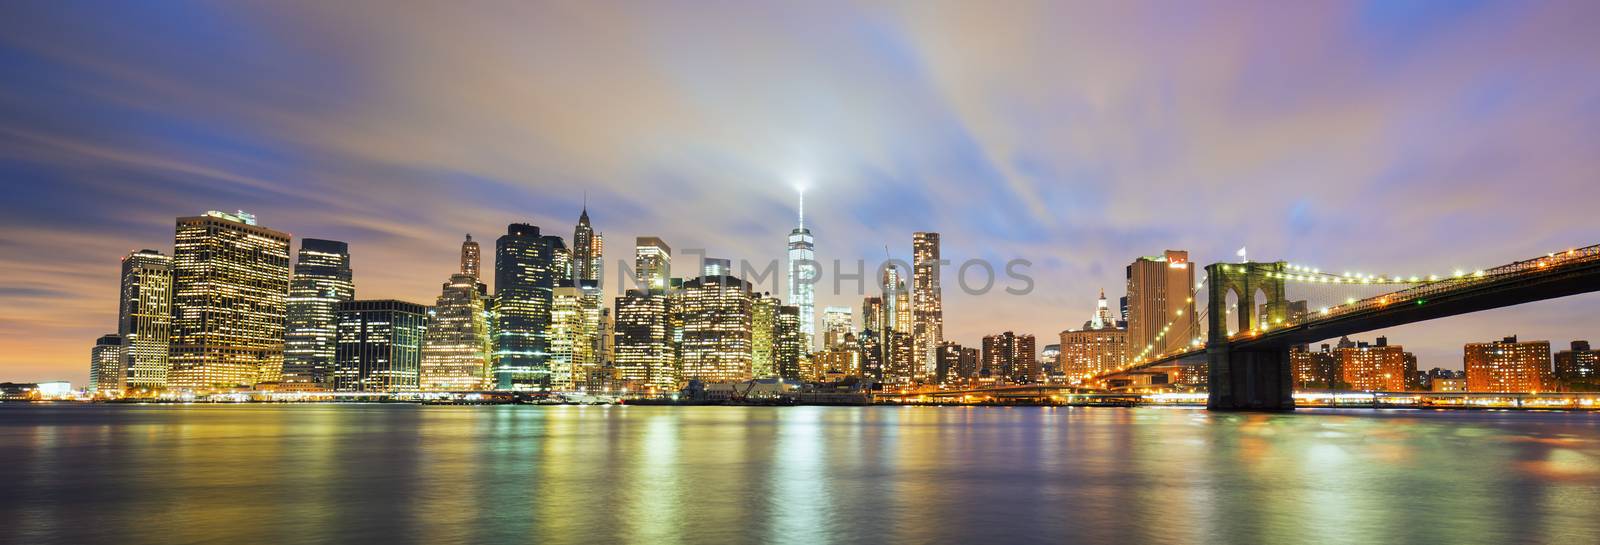 Panoramic view of New York City Manhattan midtown at dusk by vwalakte